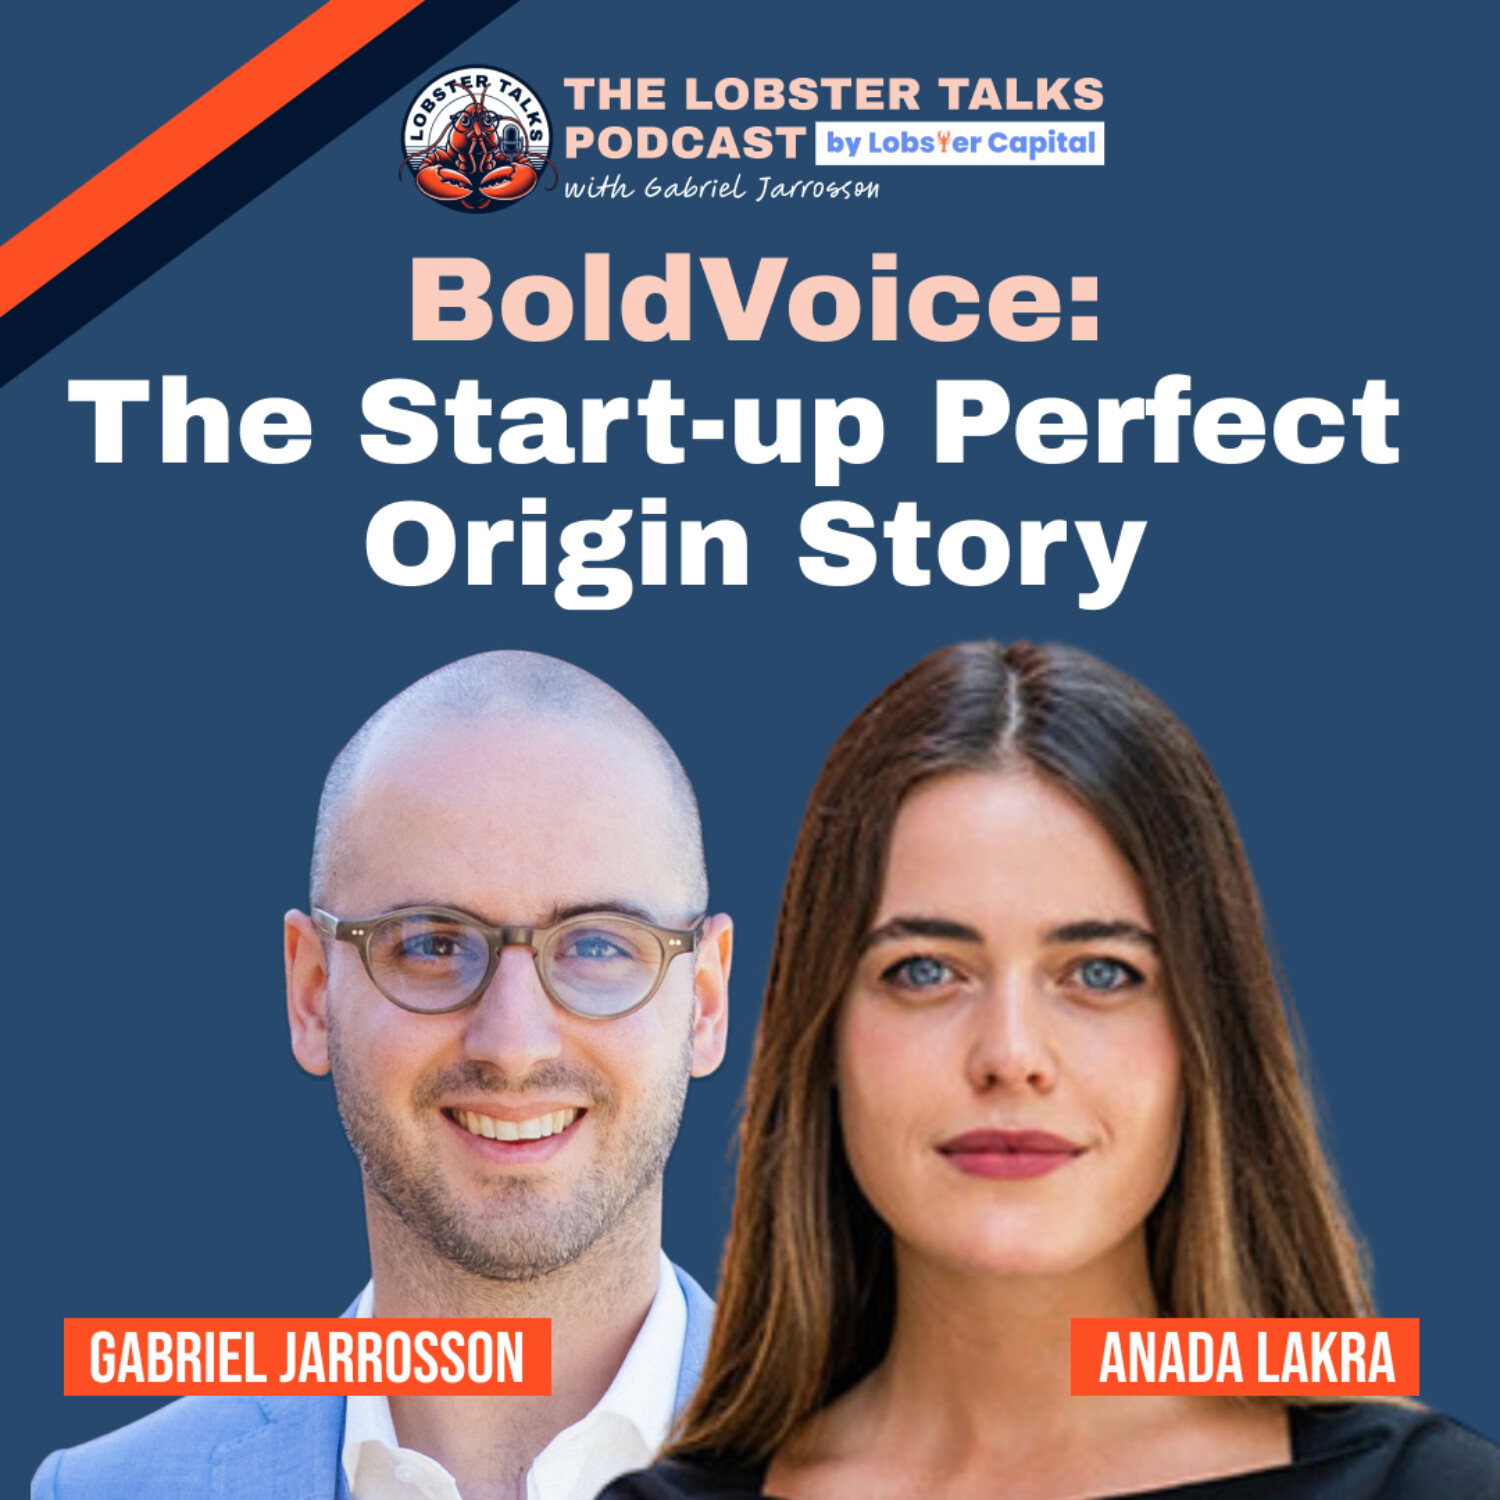 BoldVoice: How a Non-Native Speaker Built an App to Improve English Pronunciation (The Start-up Perfect Origin Story) | Episode 01